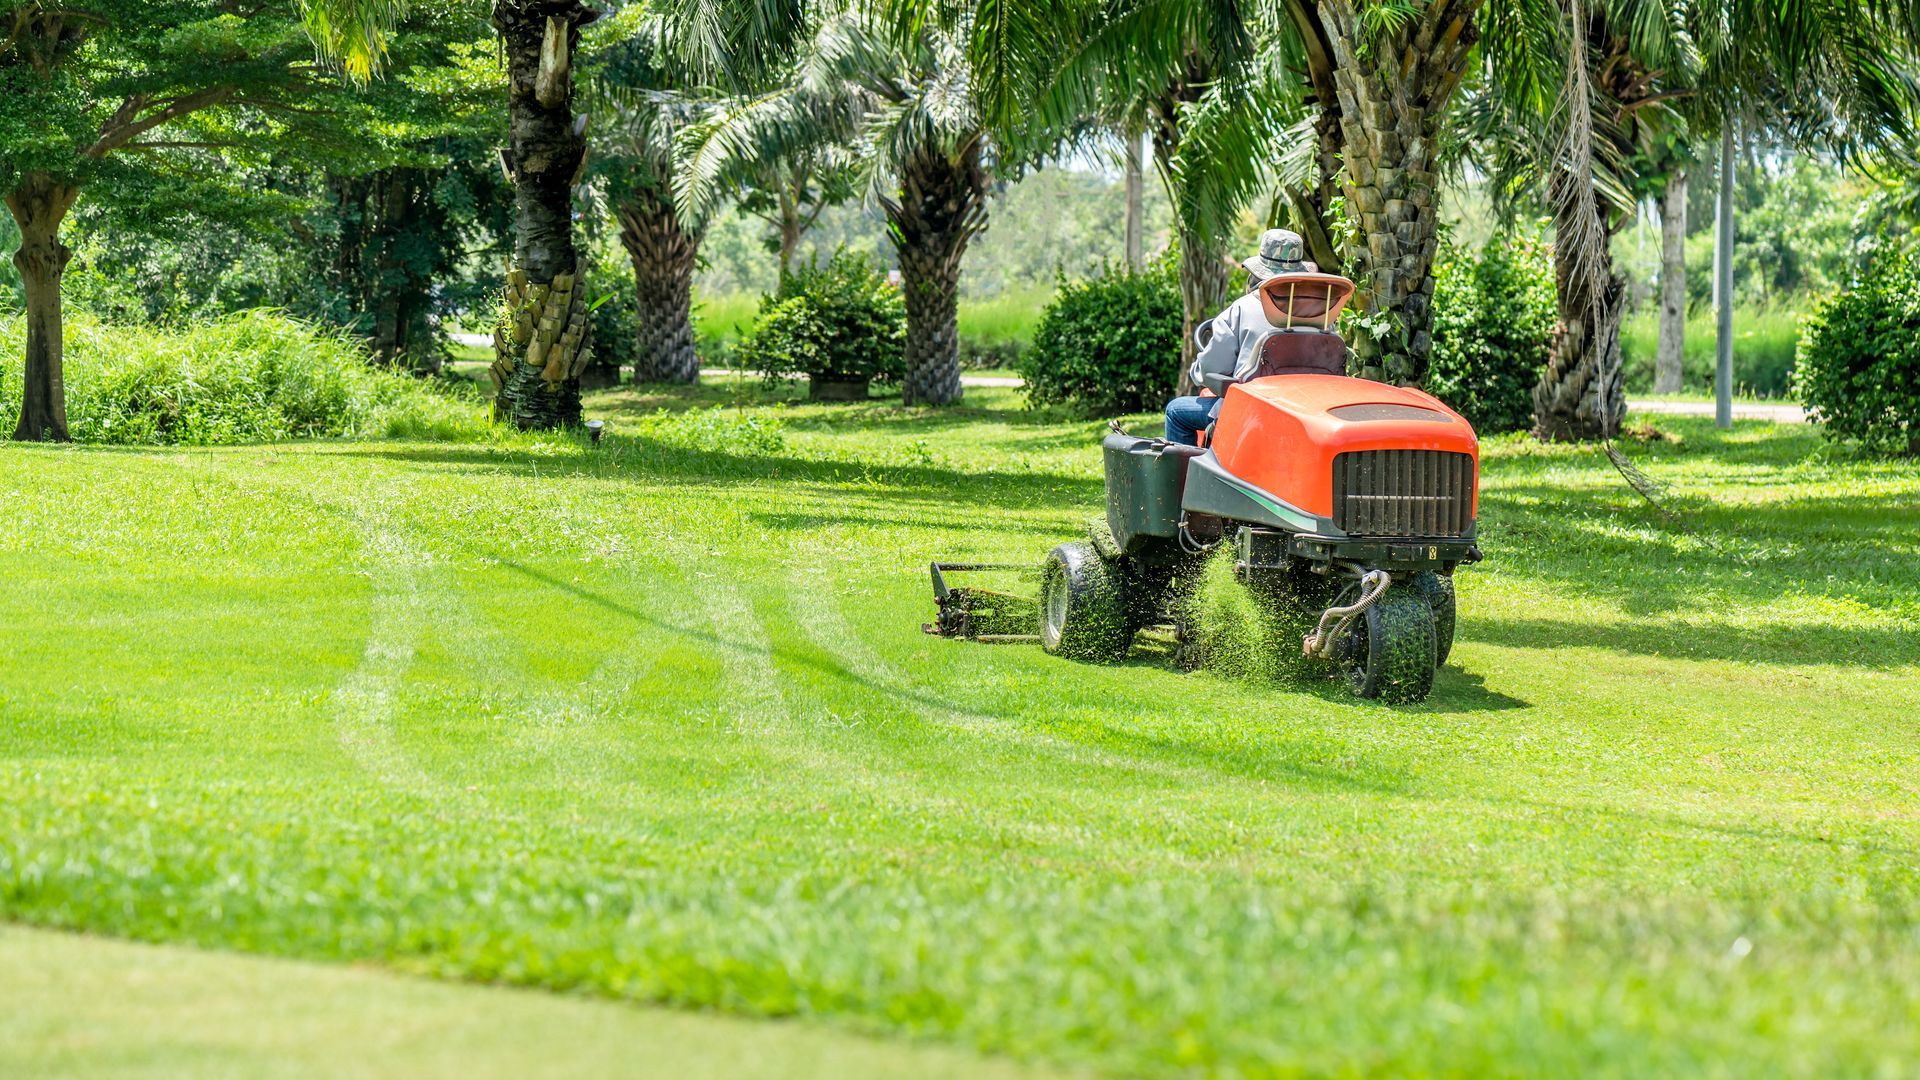 Driving a riding lawn mower in garden